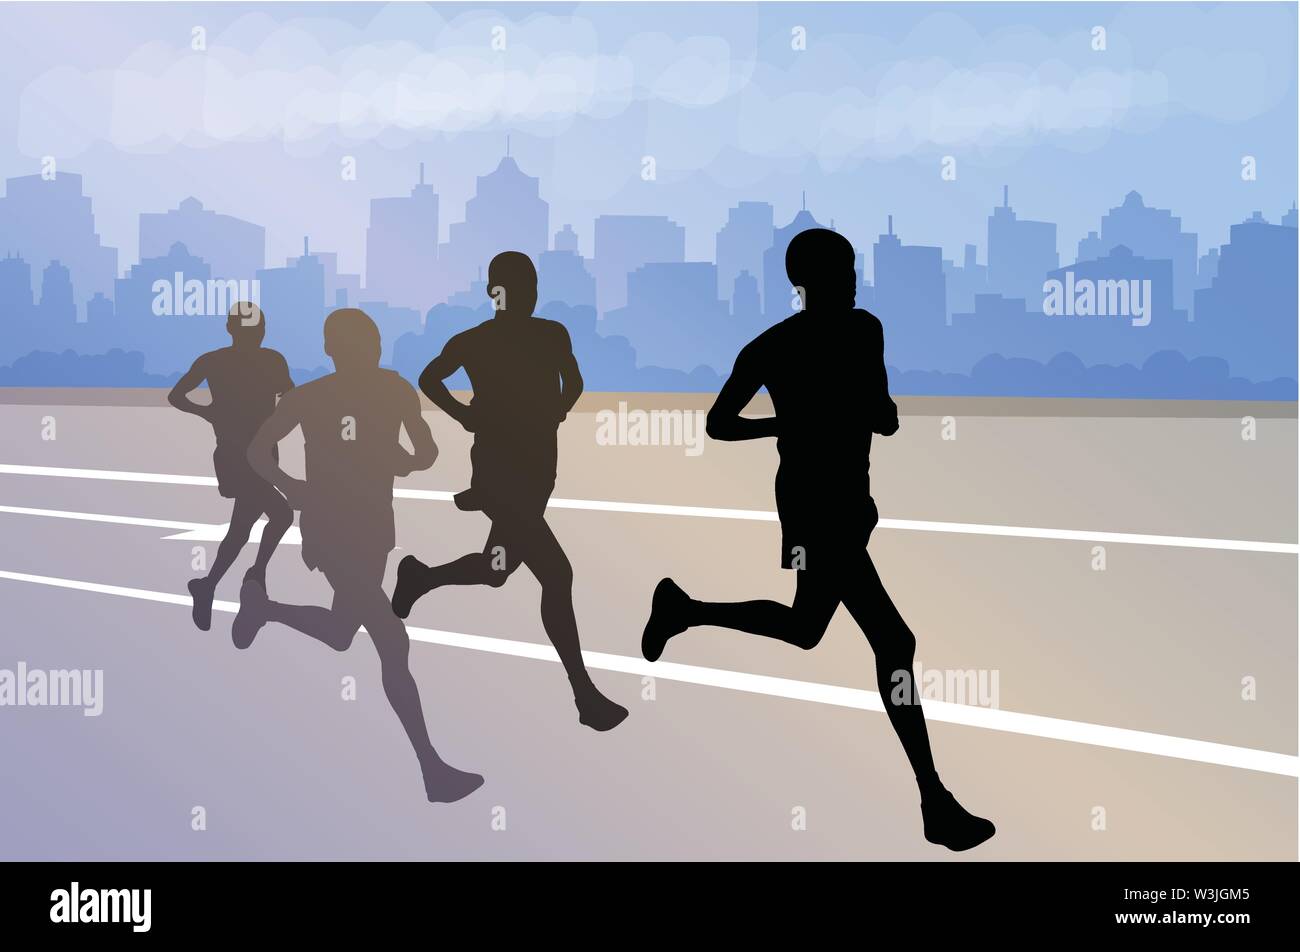 group of marathon runners silhouettes on abstract city background - vector Stock Vector